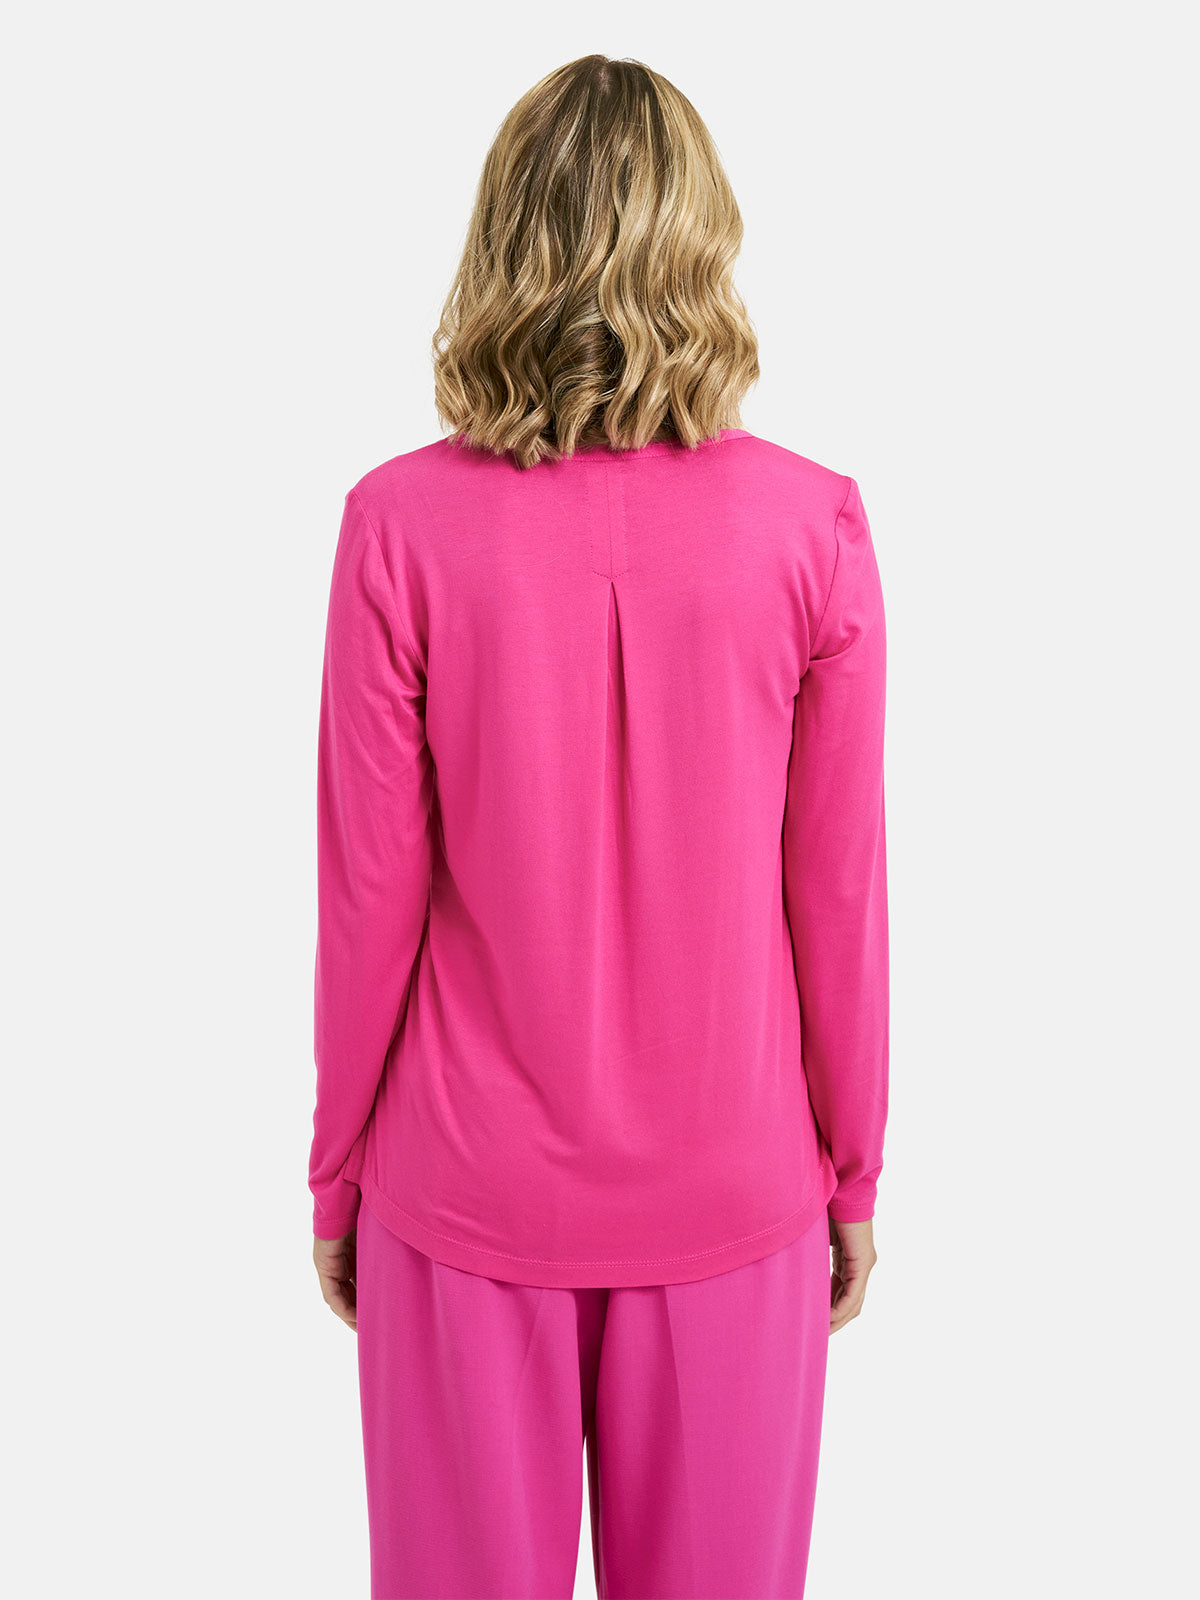 Jersey Blouse in Hot Pink